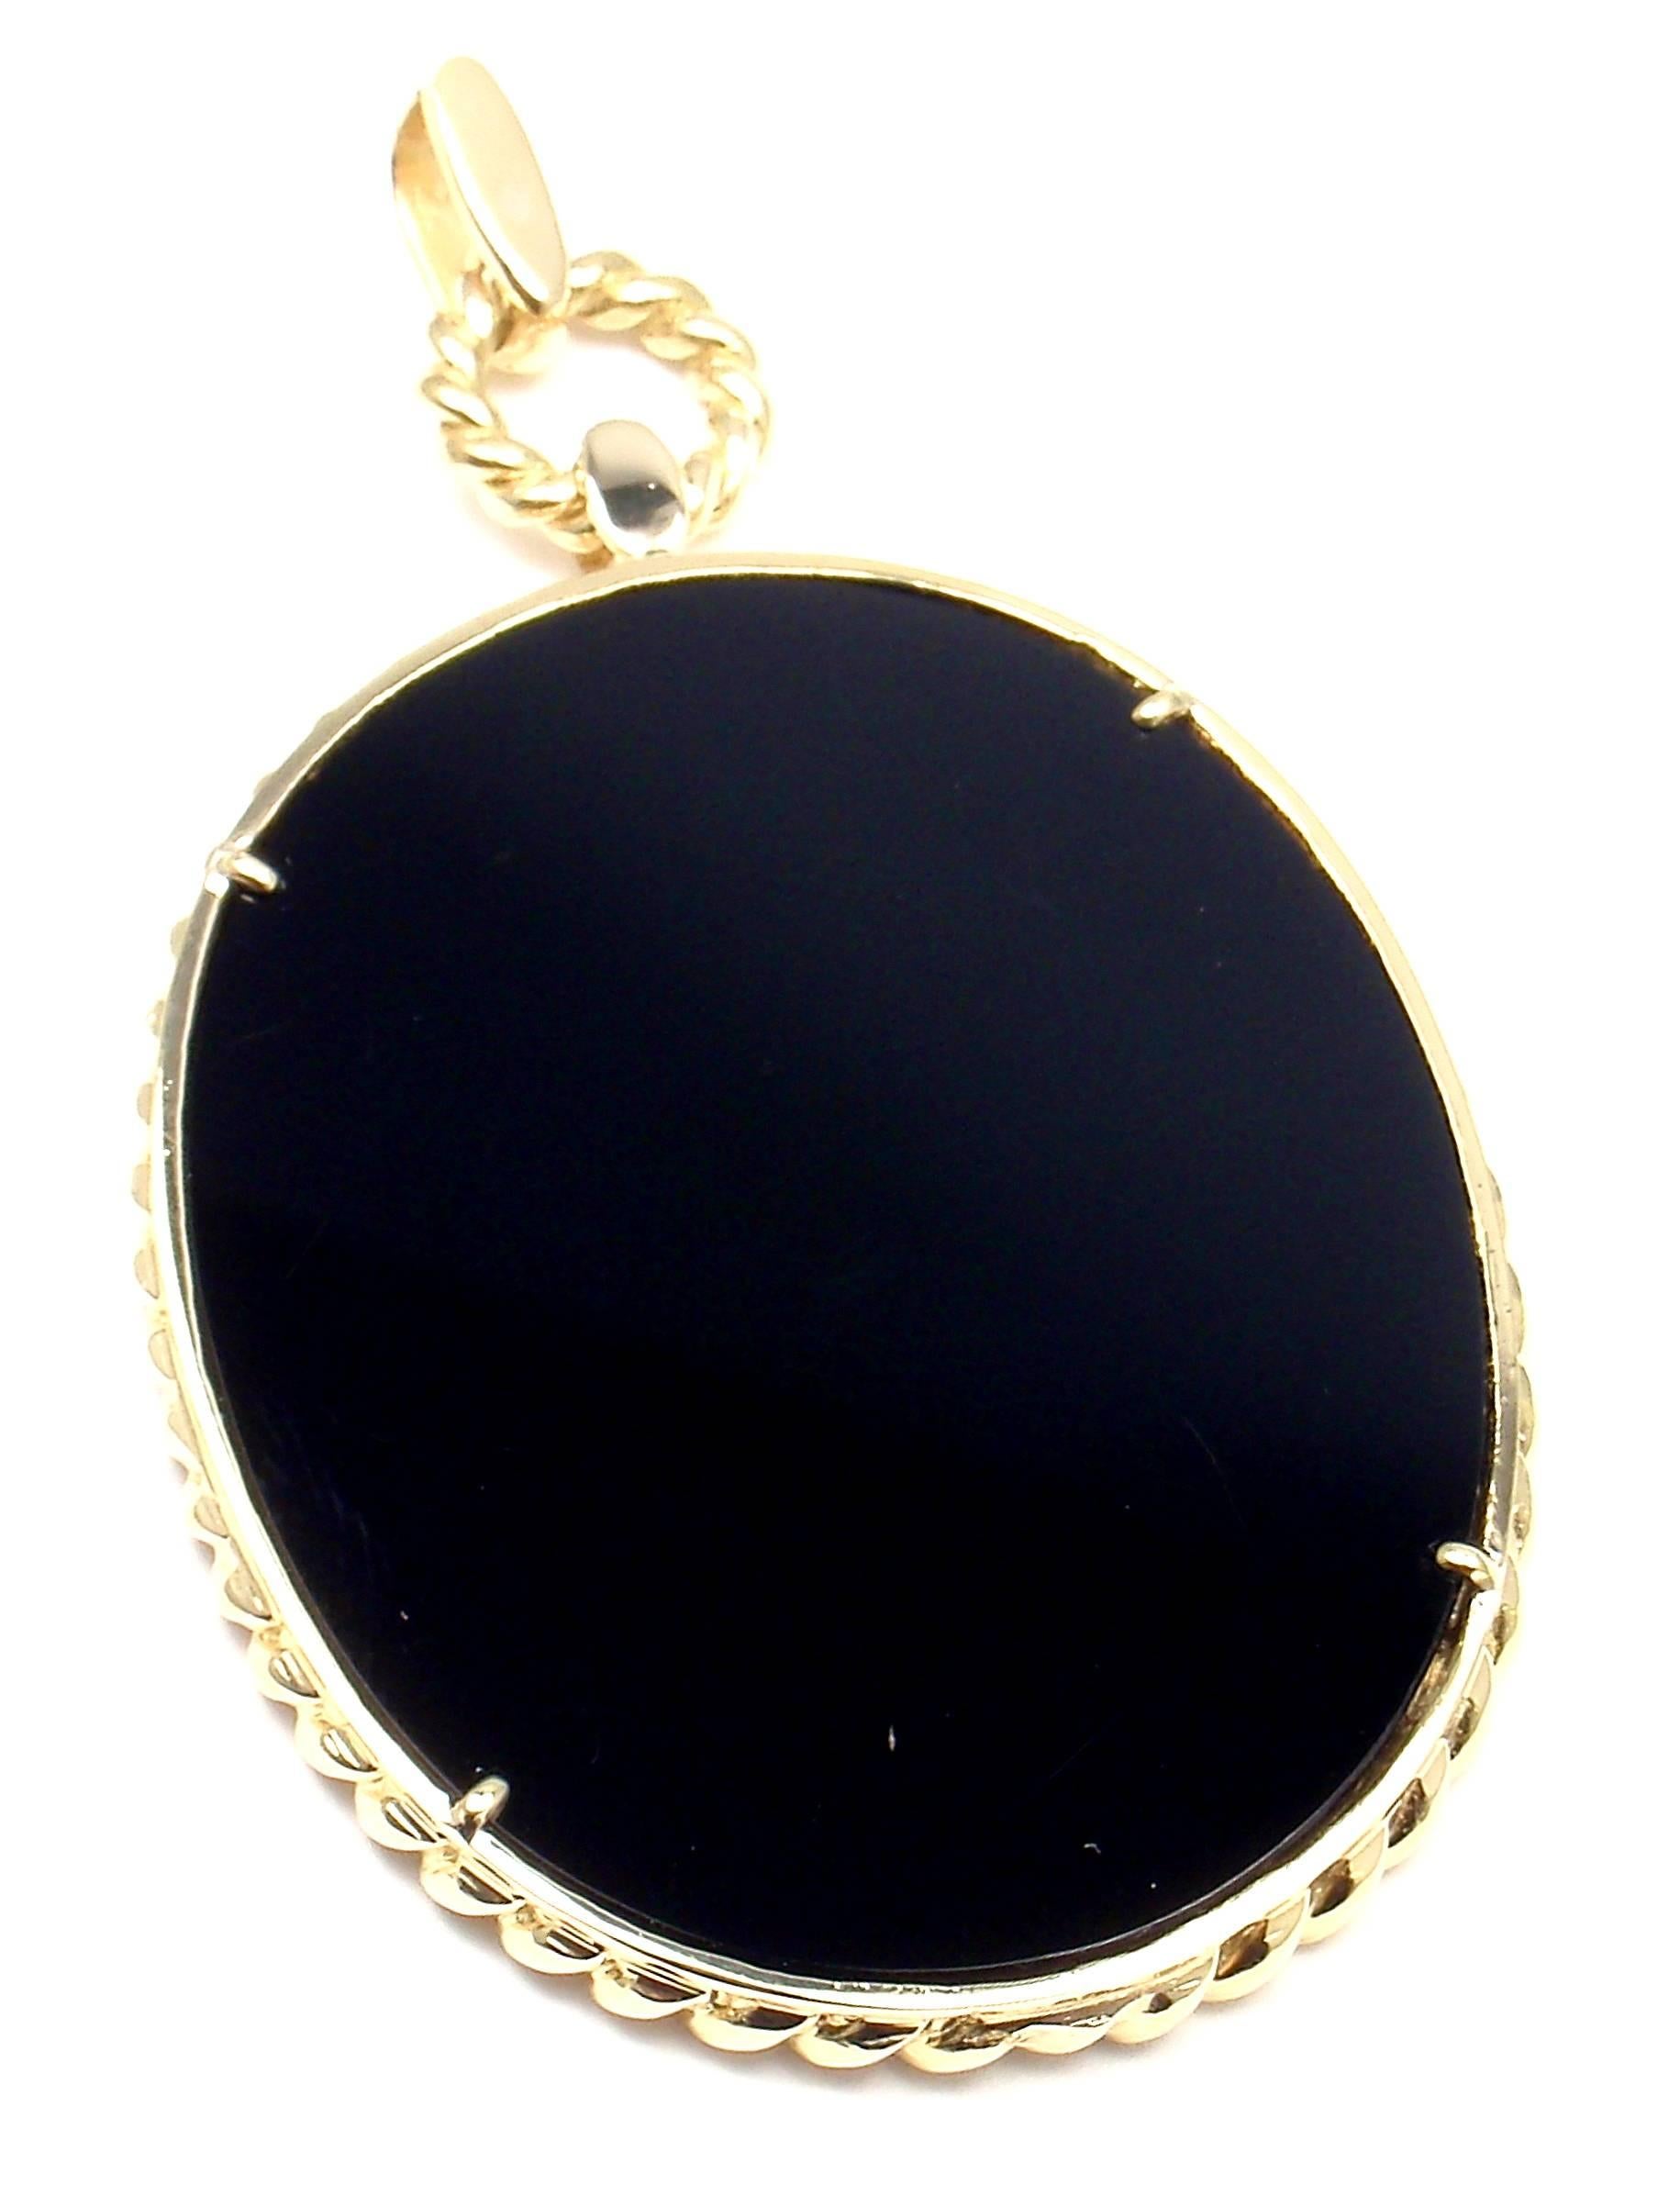 18k Yellow Gold Black Onyx Diamond Pendant by Van Cleef & Arpels.
With 26 round brilliant cut diamonds VVS1 clarity, E color total weight 
approx. 1ct

Details:
Measurements: 3